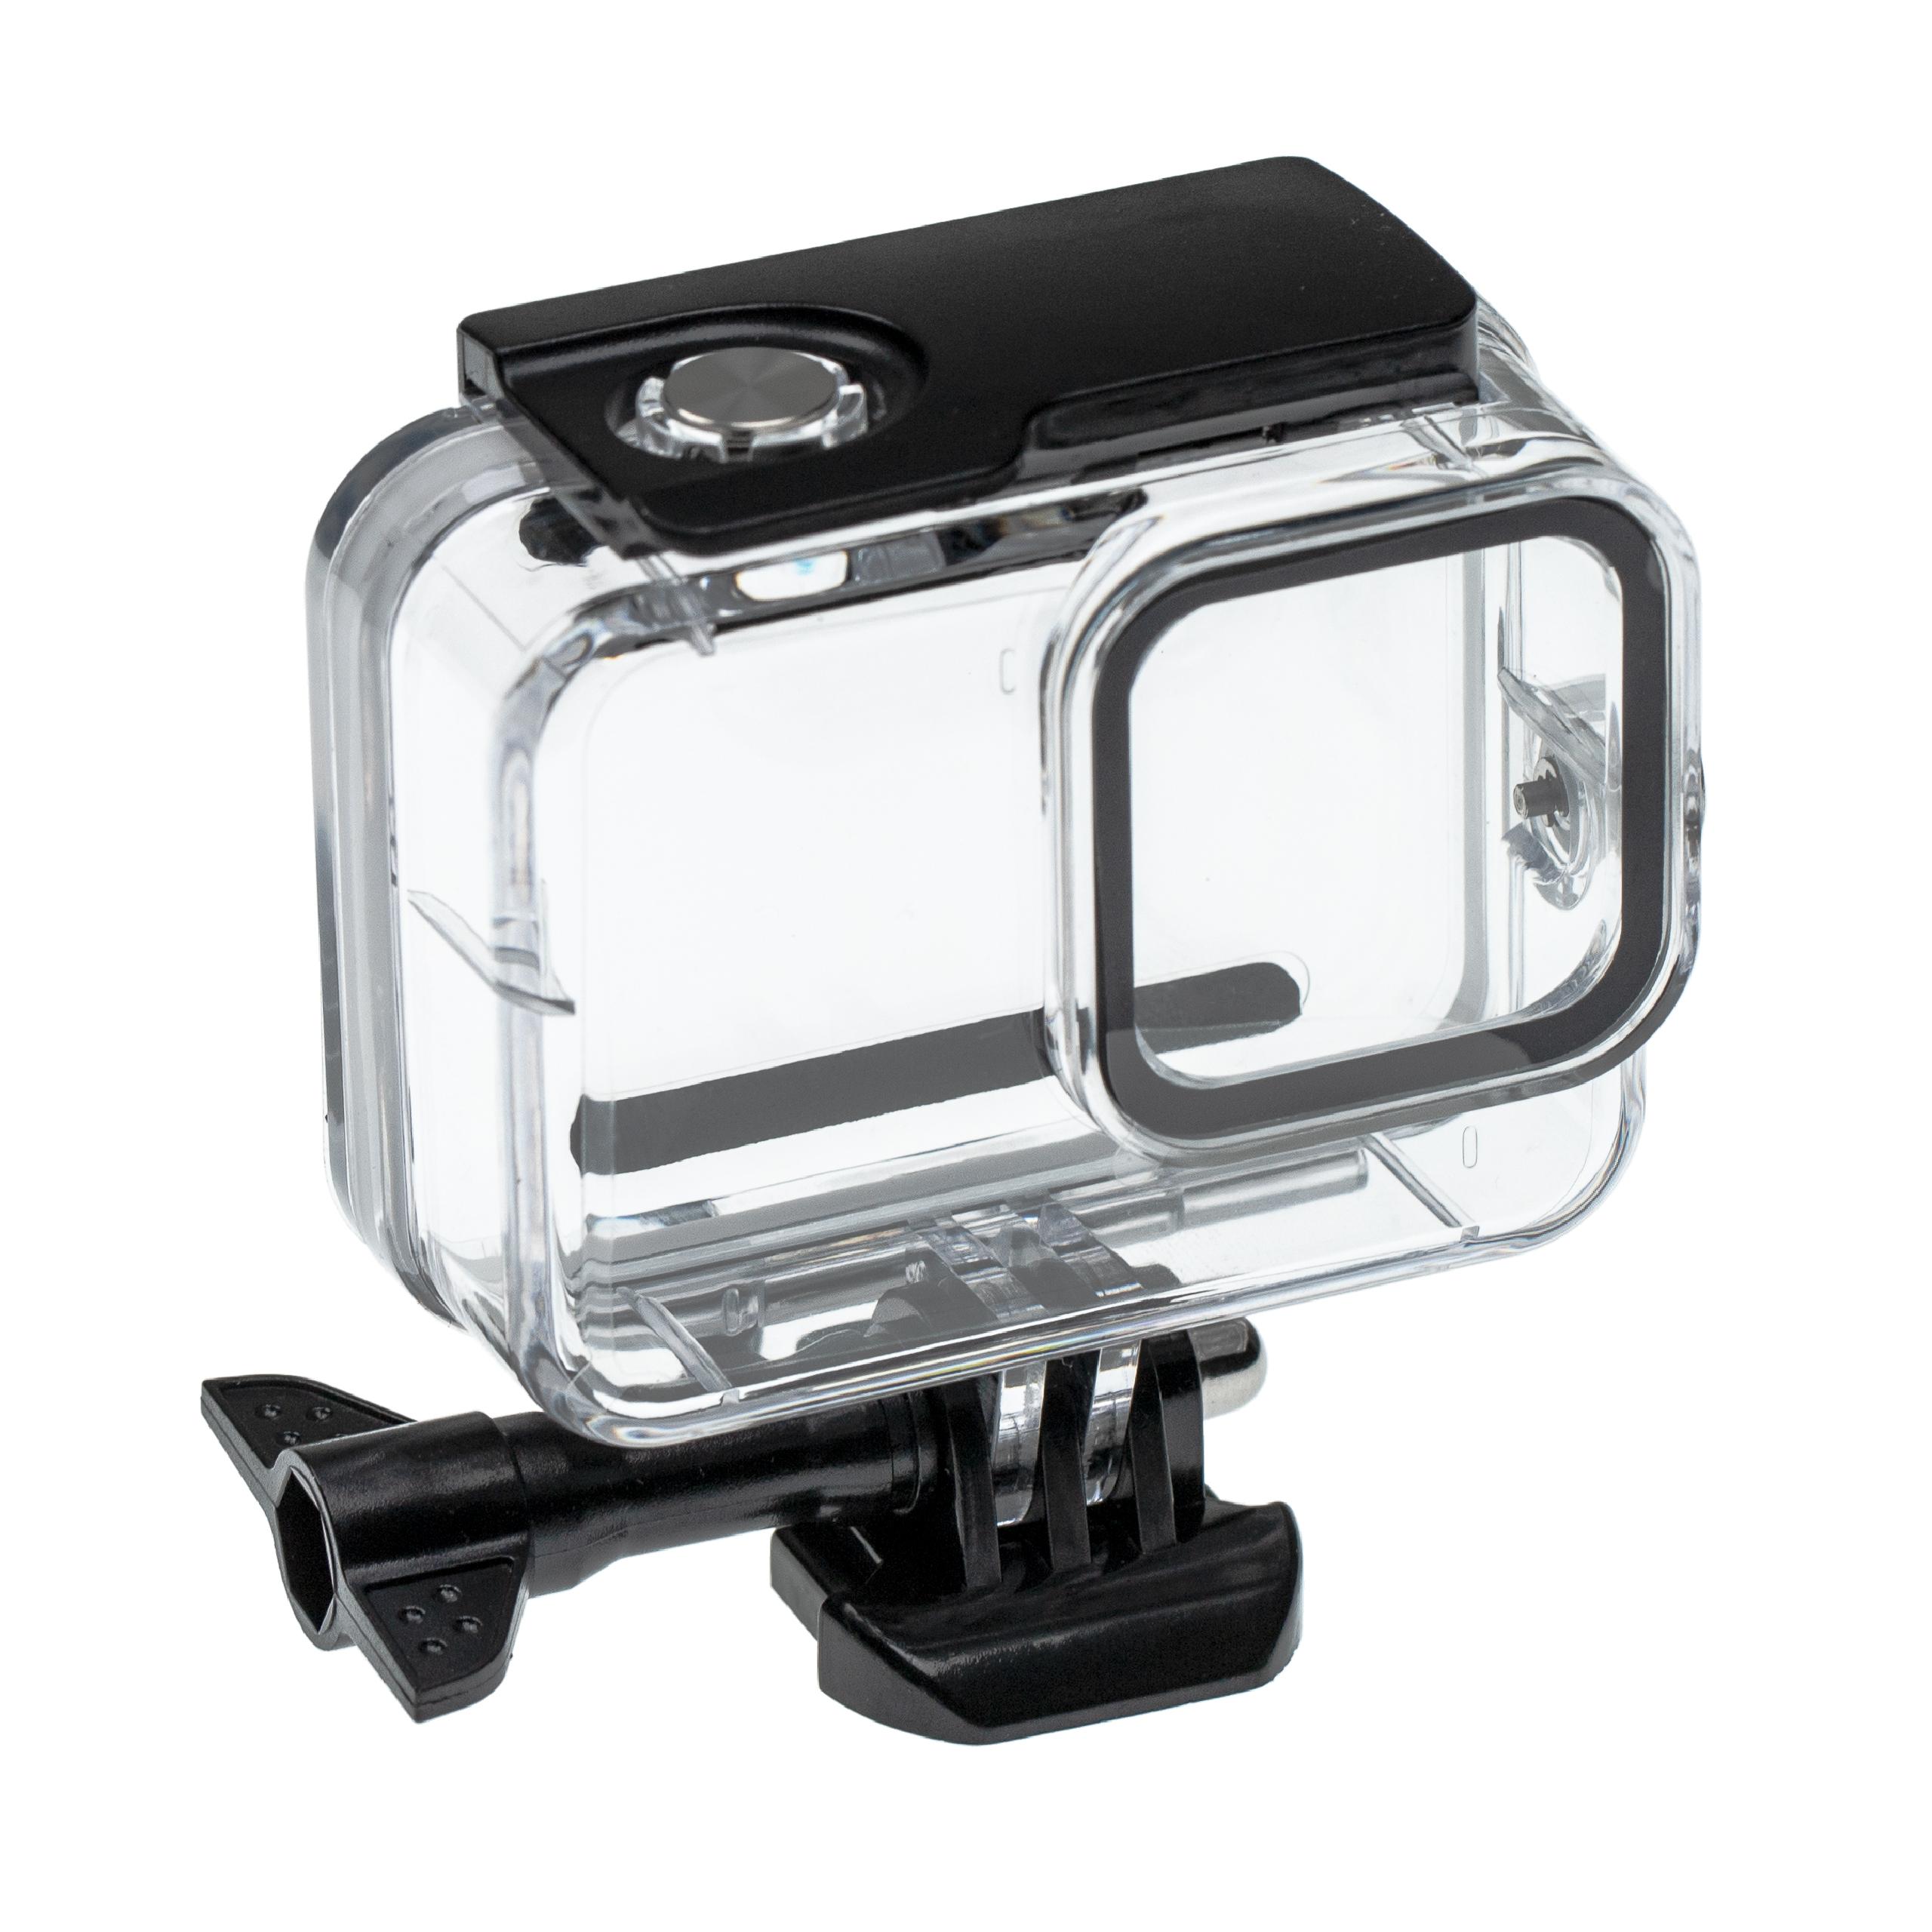 Underwater Housing suitable for GoPro Hero 8 Action Camera - Up to a max. Depth of 60 m